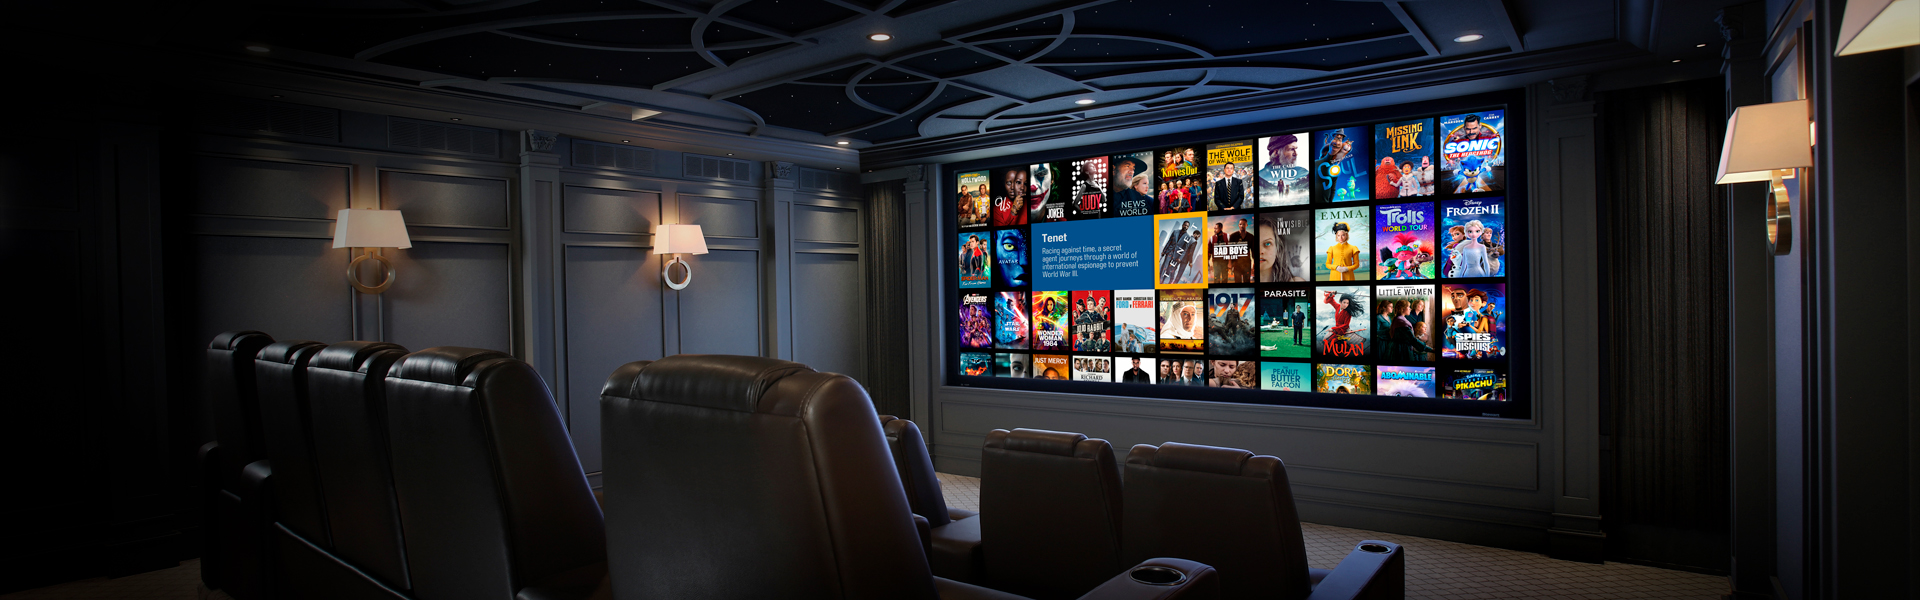 Kaleidescape - Home Theater  / High-Performance Audio / Whole House Music